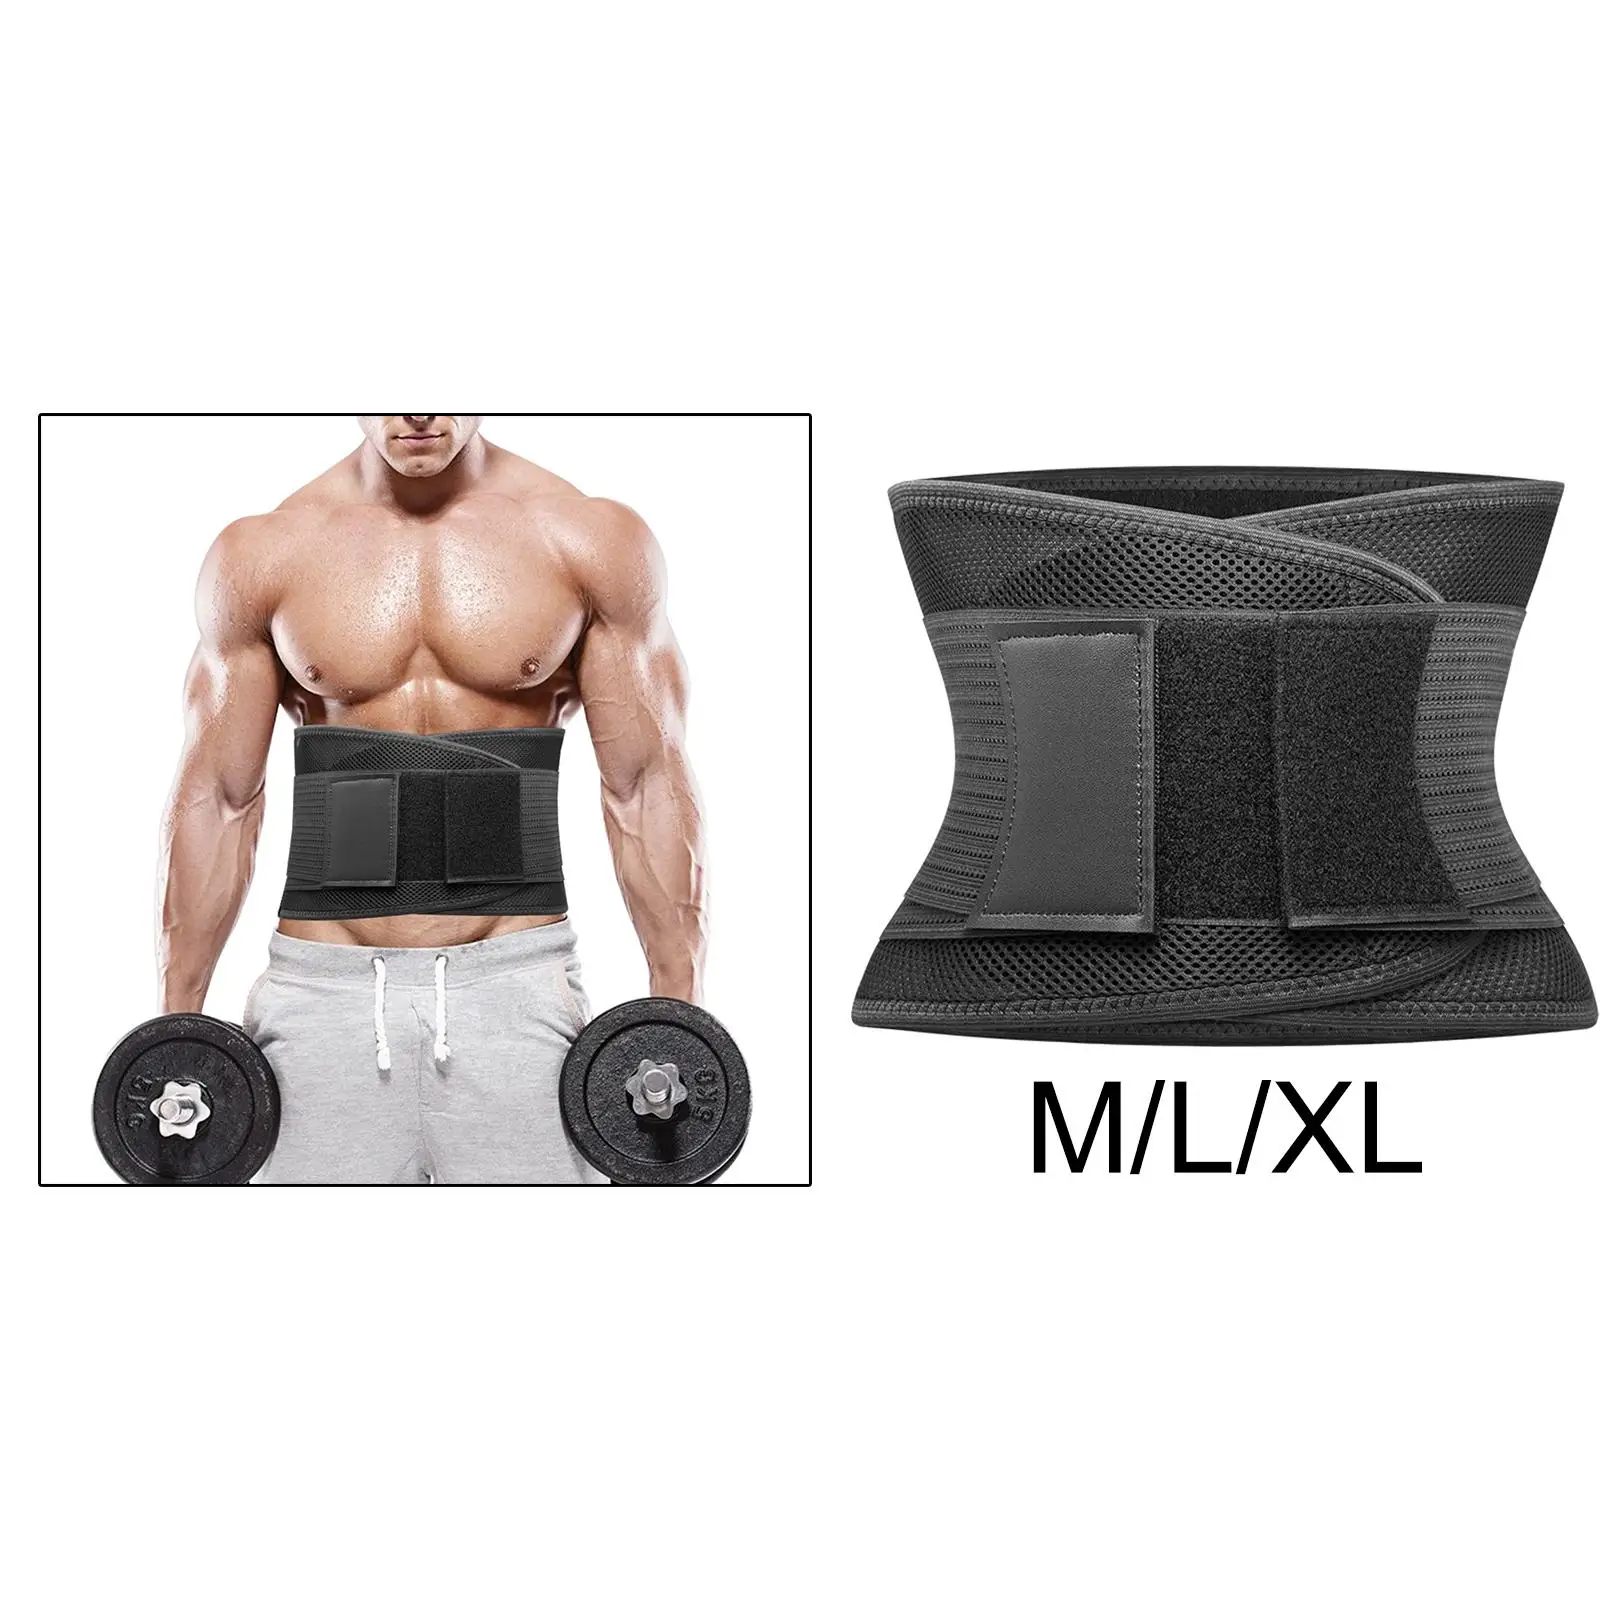 Nylon Waist Support Belt Back Brace Compression Body Building Lumbar with 4 Stays Breathable Lower Back Support for Men Women